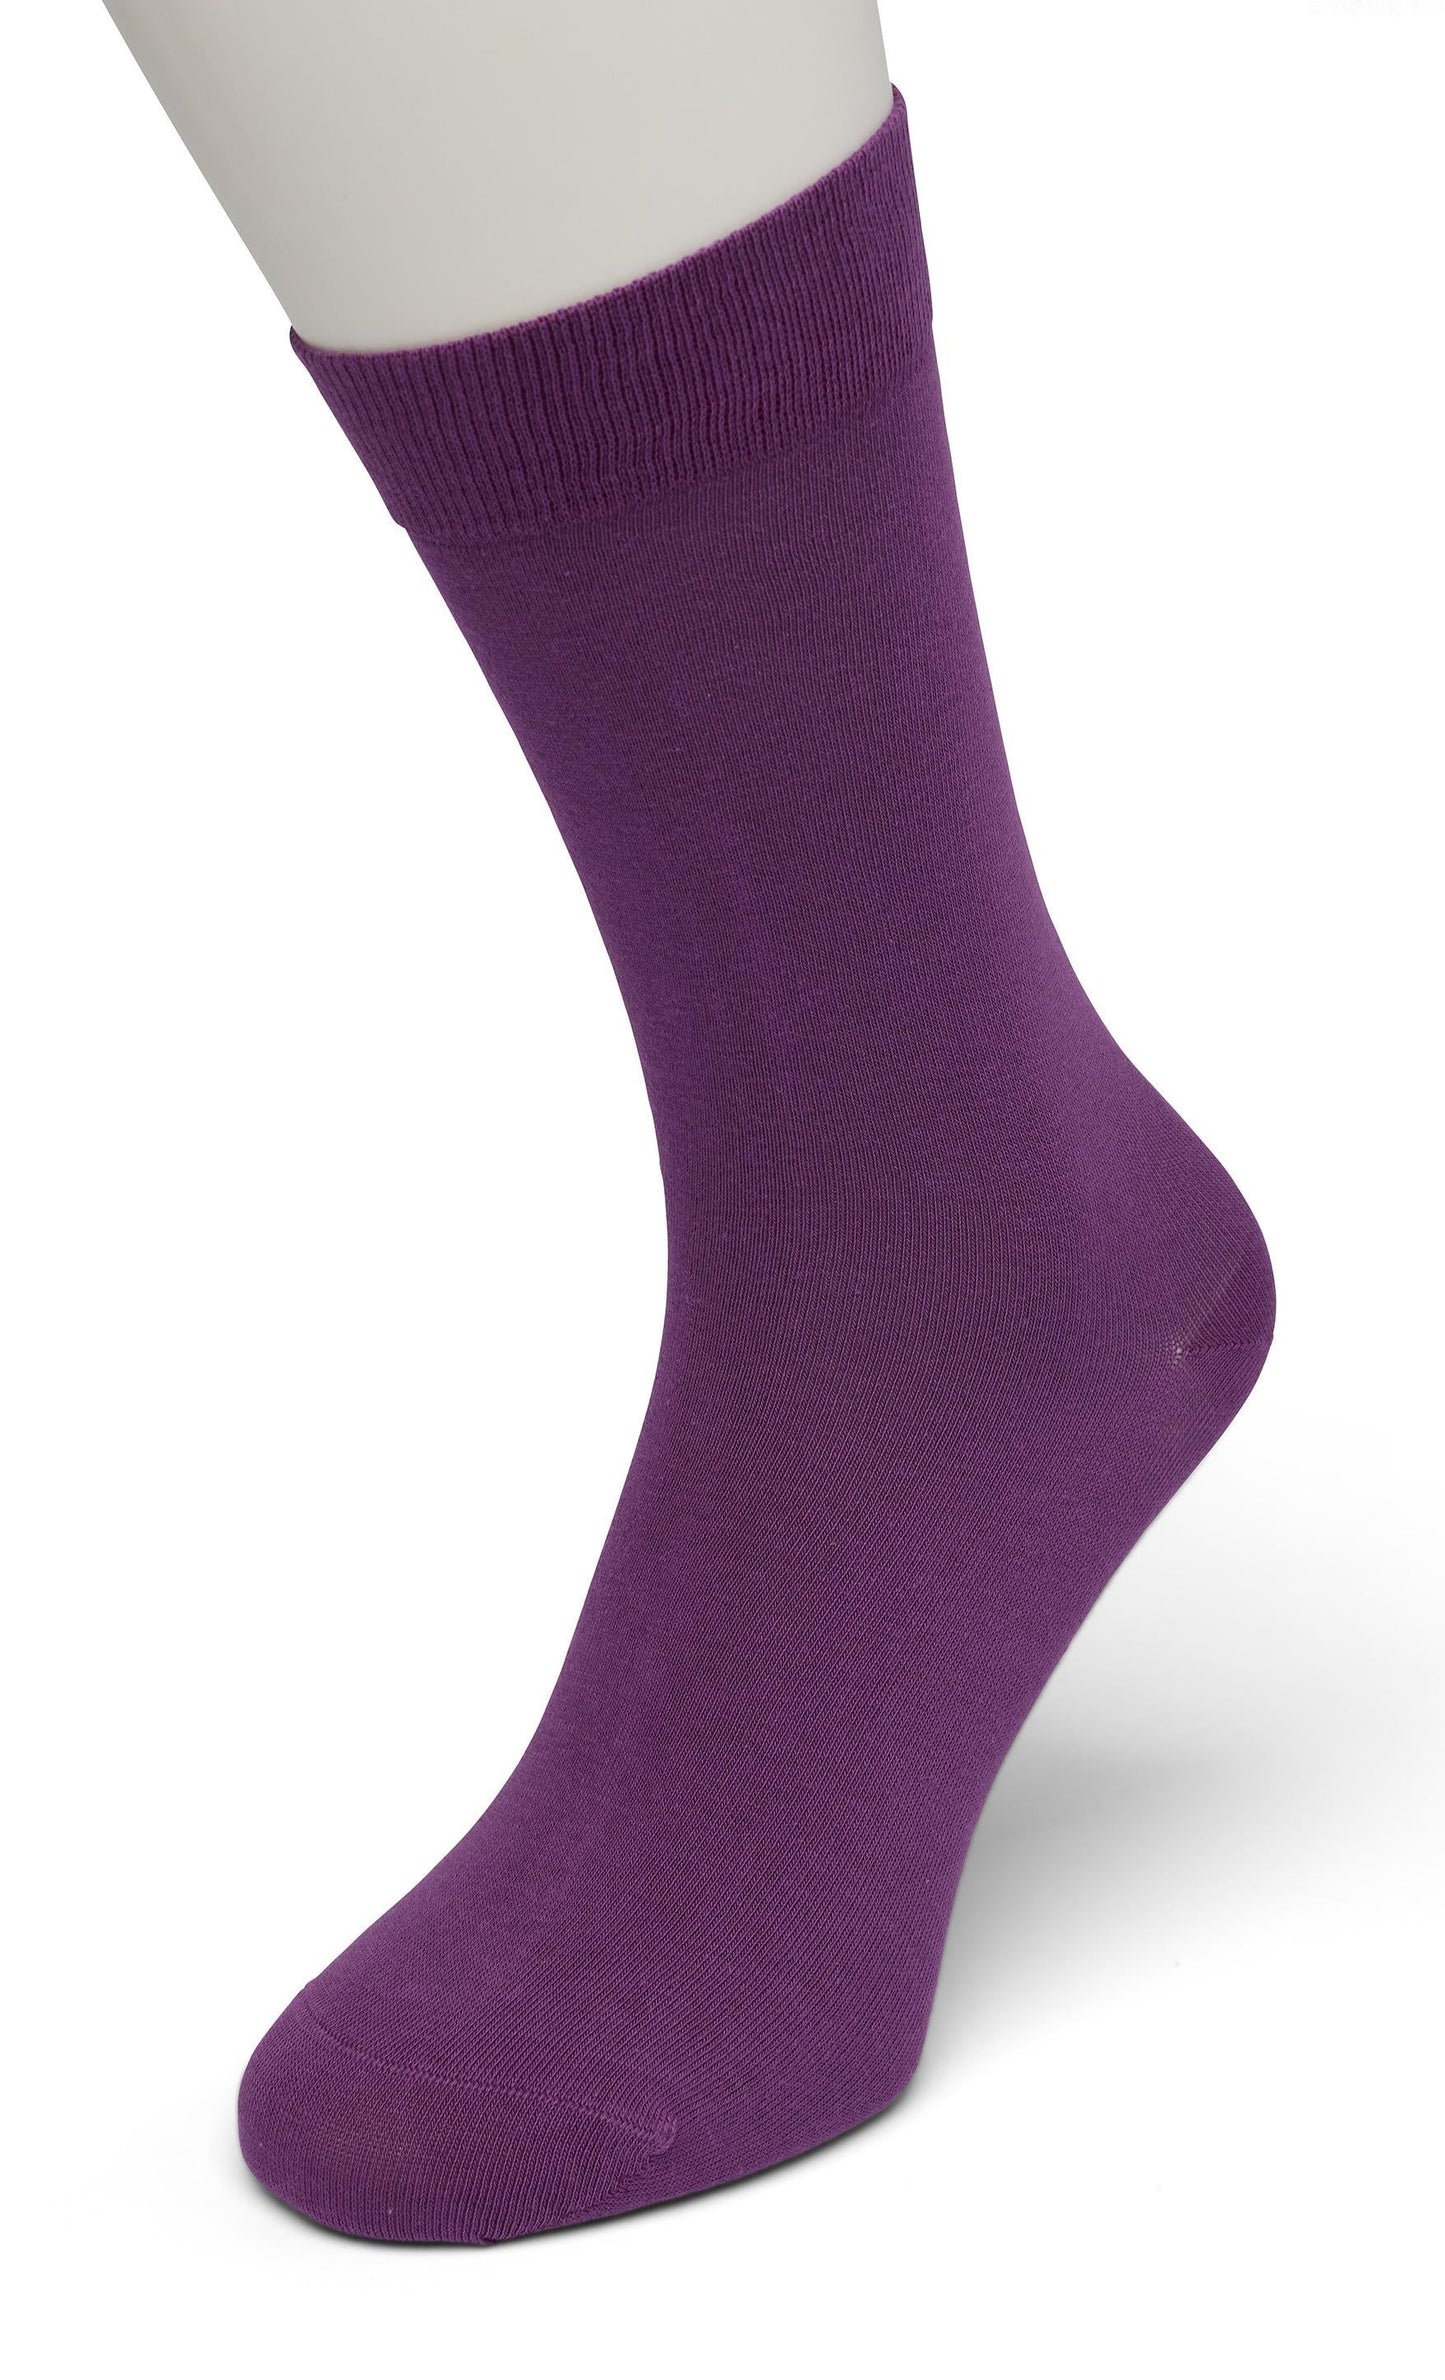 Bonnie Doon 83422 / BD632401 Cotton Sock -  Purple (concord grape) ankle socks available in men and women sizes